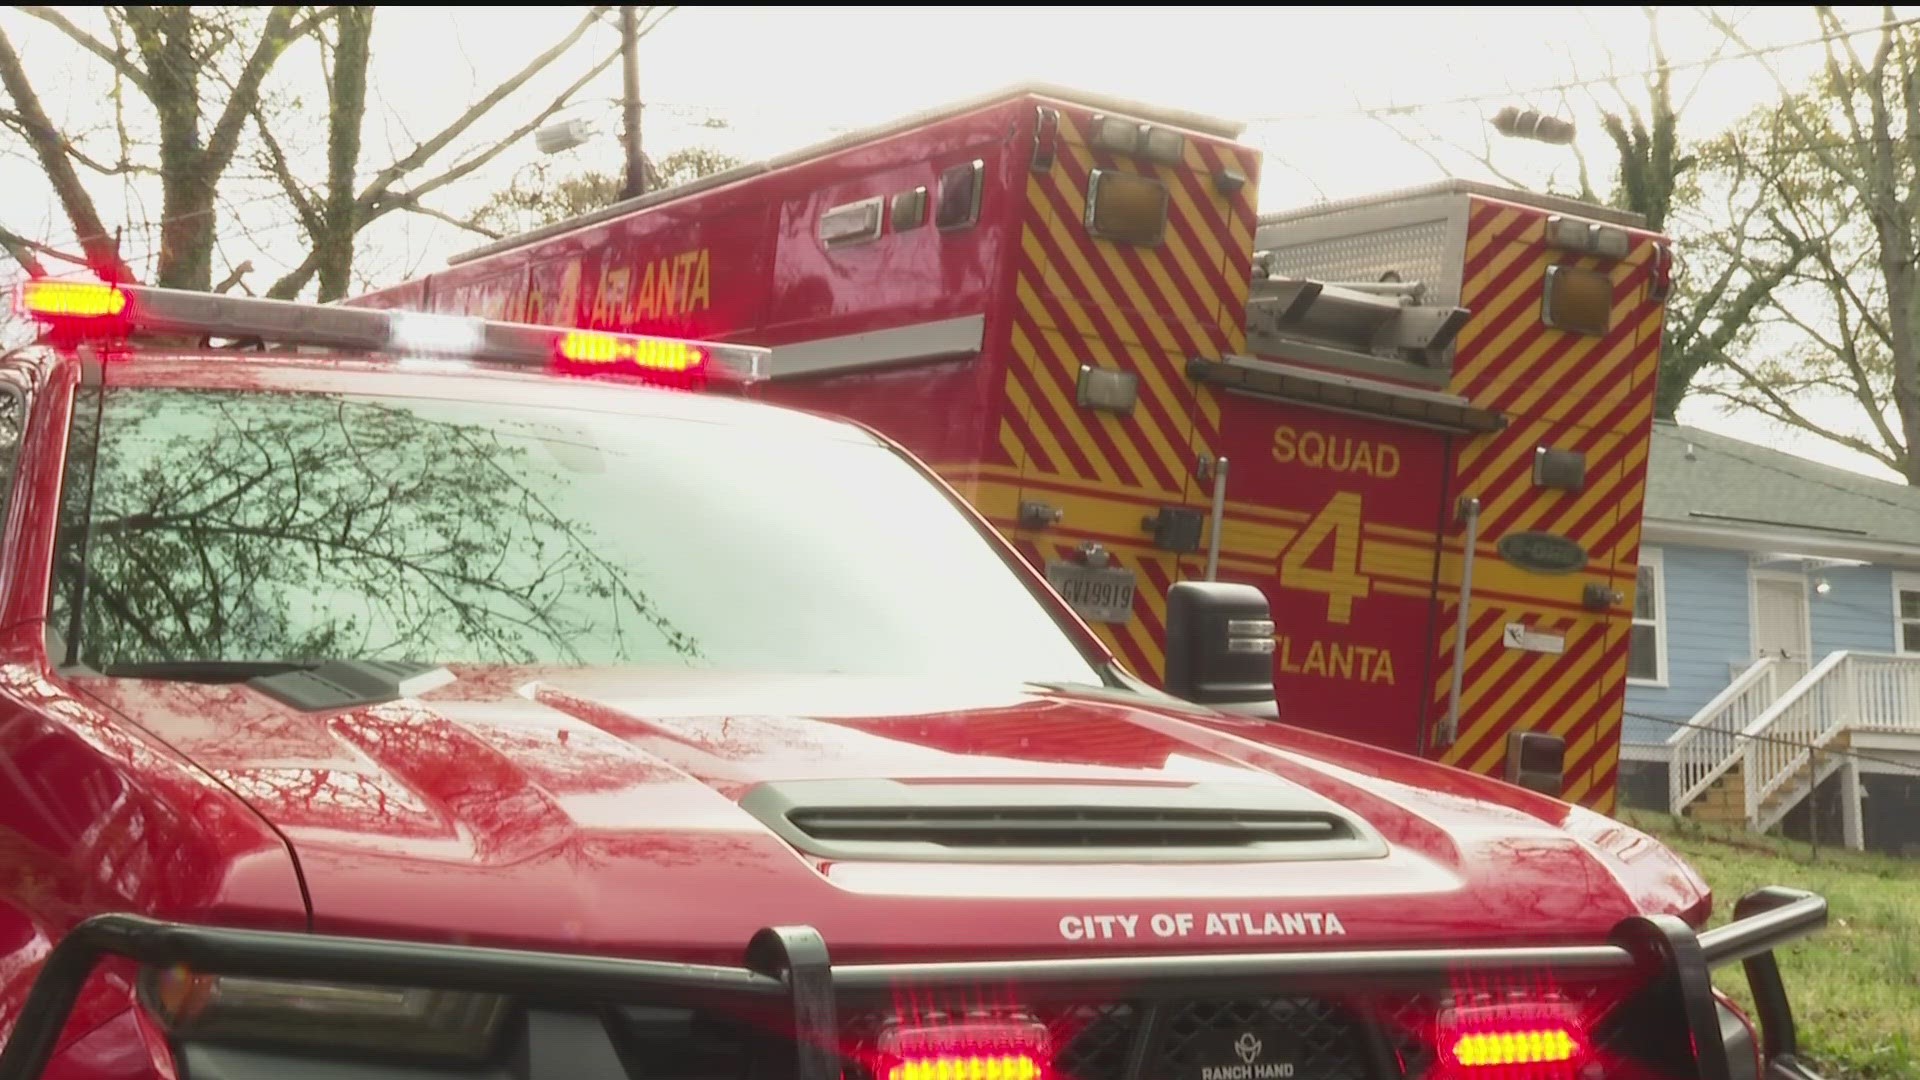 Officials said the crew was returning to their firehouse after investigating a reported fire at a home on Deerwood Drive at 3rd Avenue SW when it happened.